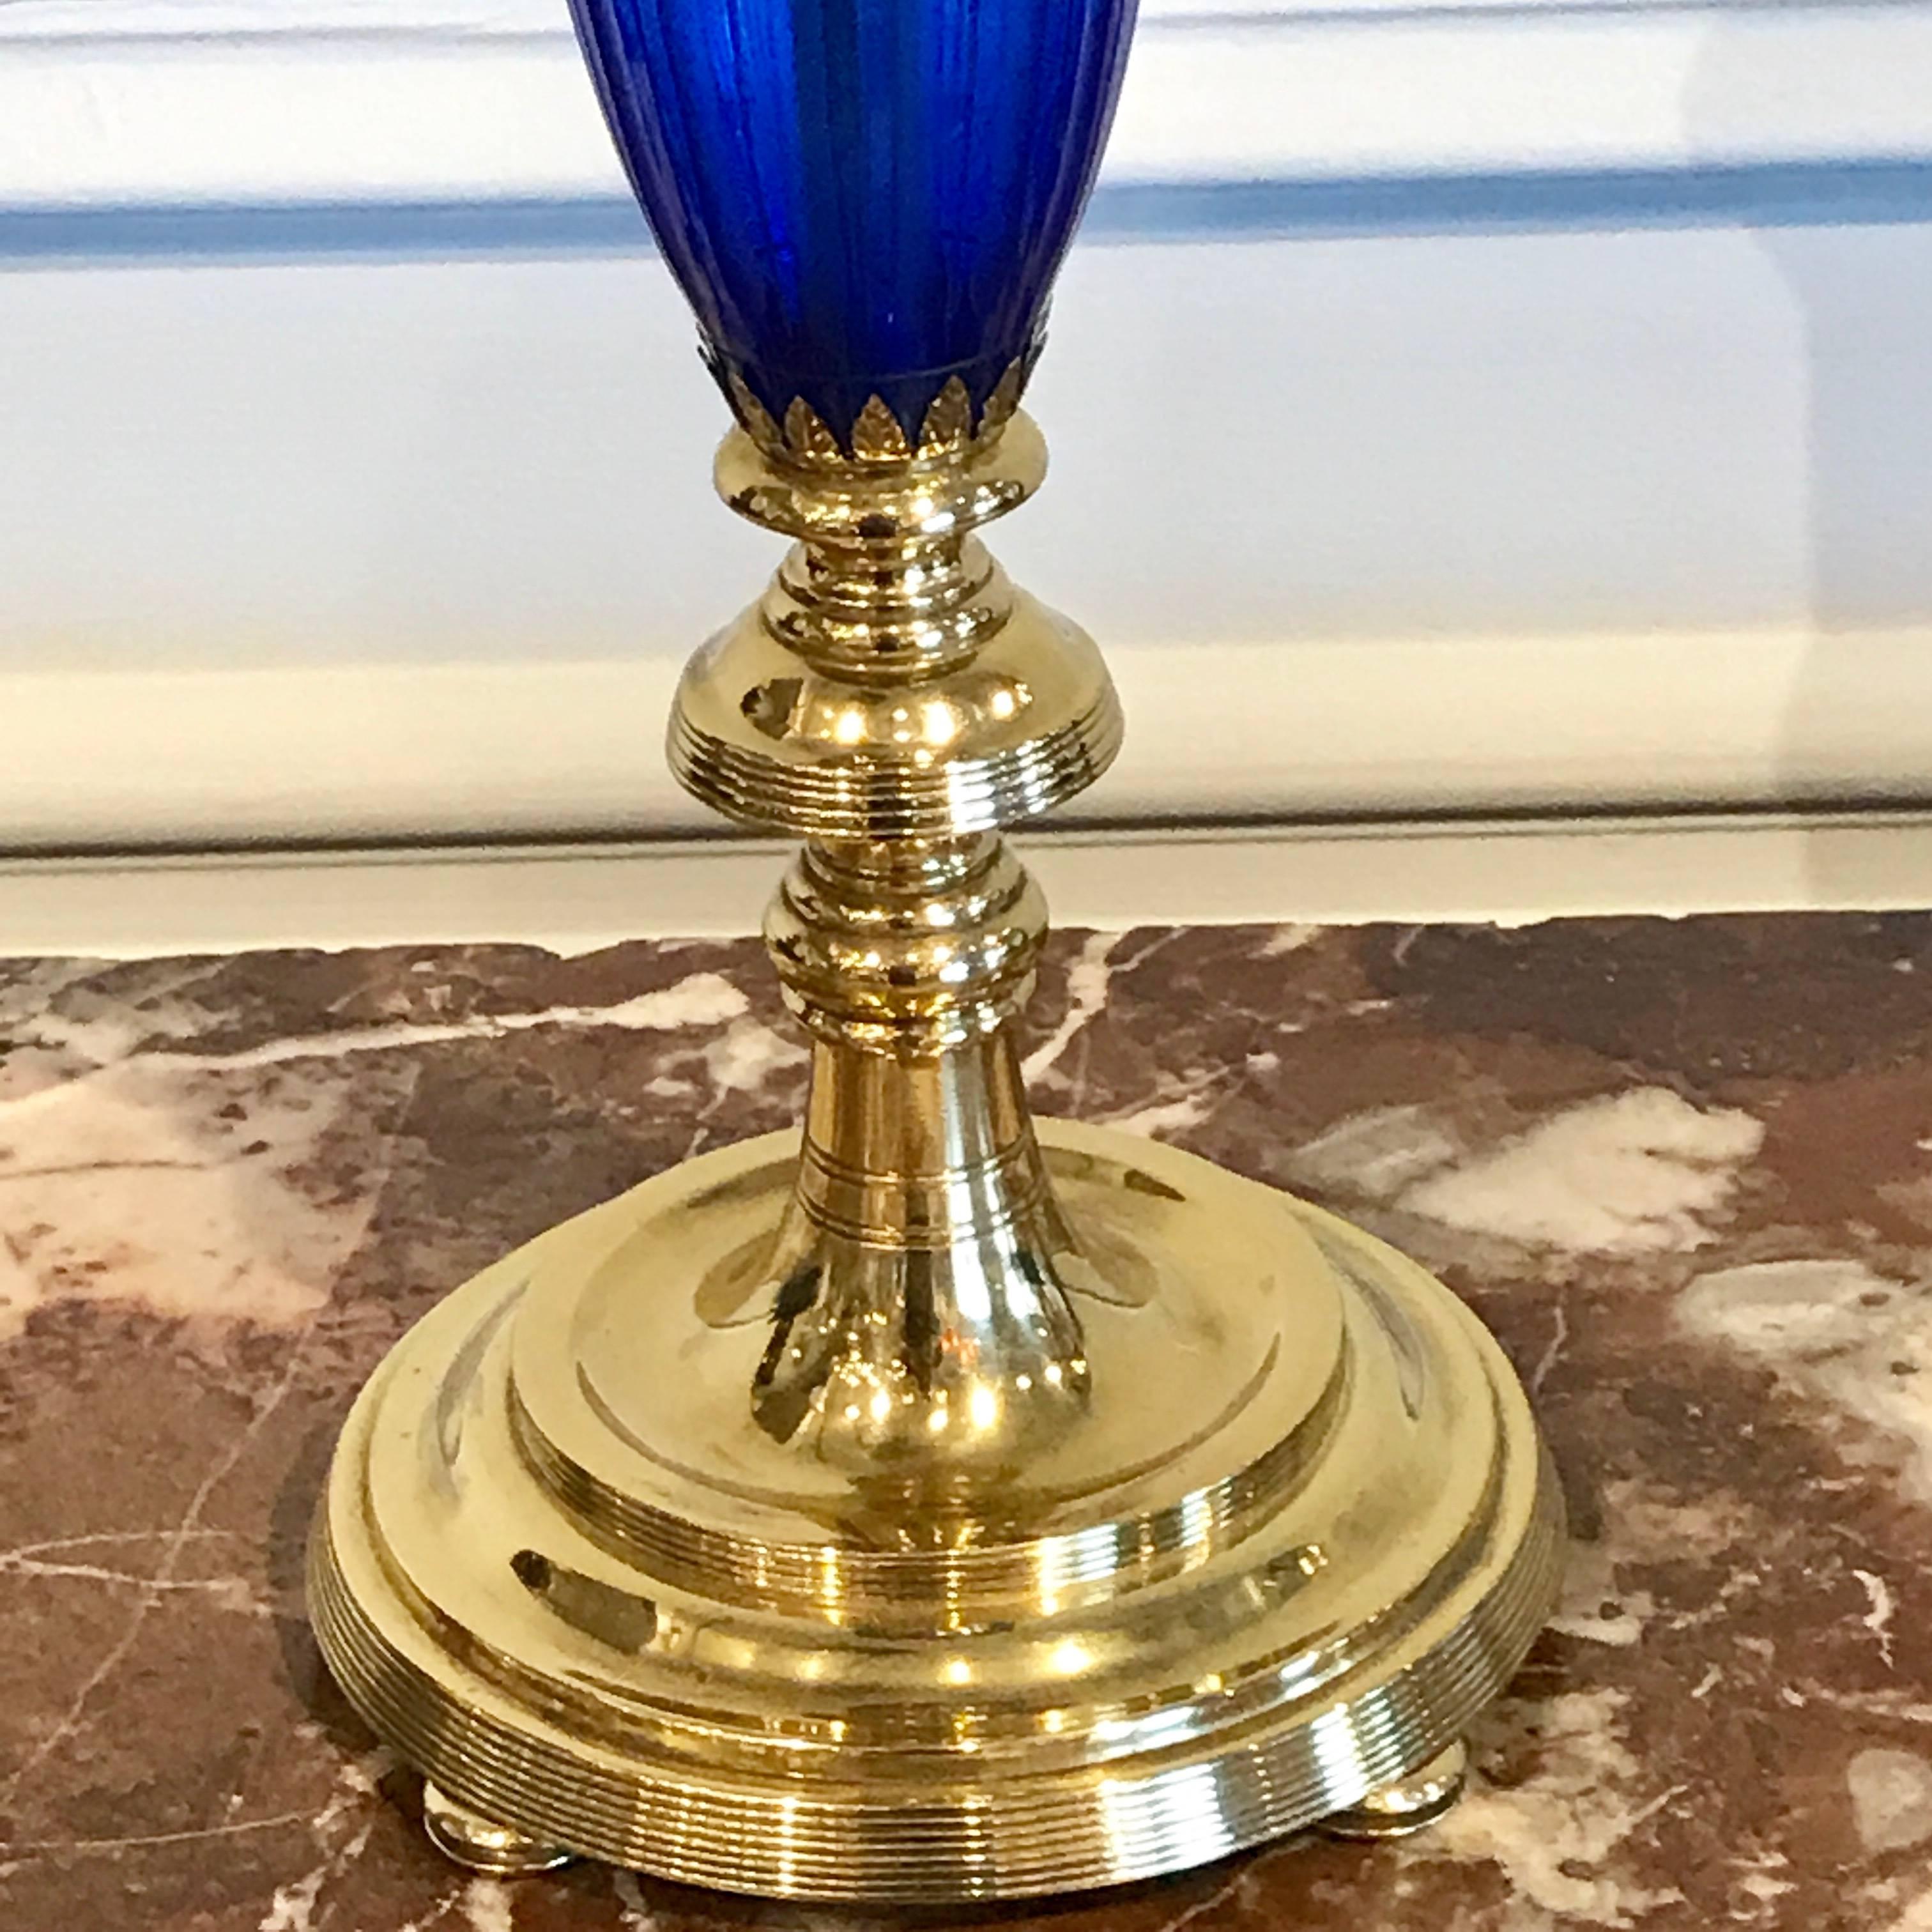 Early 20th Century Pair of Cobalt Blue and Brass-Mounted Urn Lamps by Pairpoint